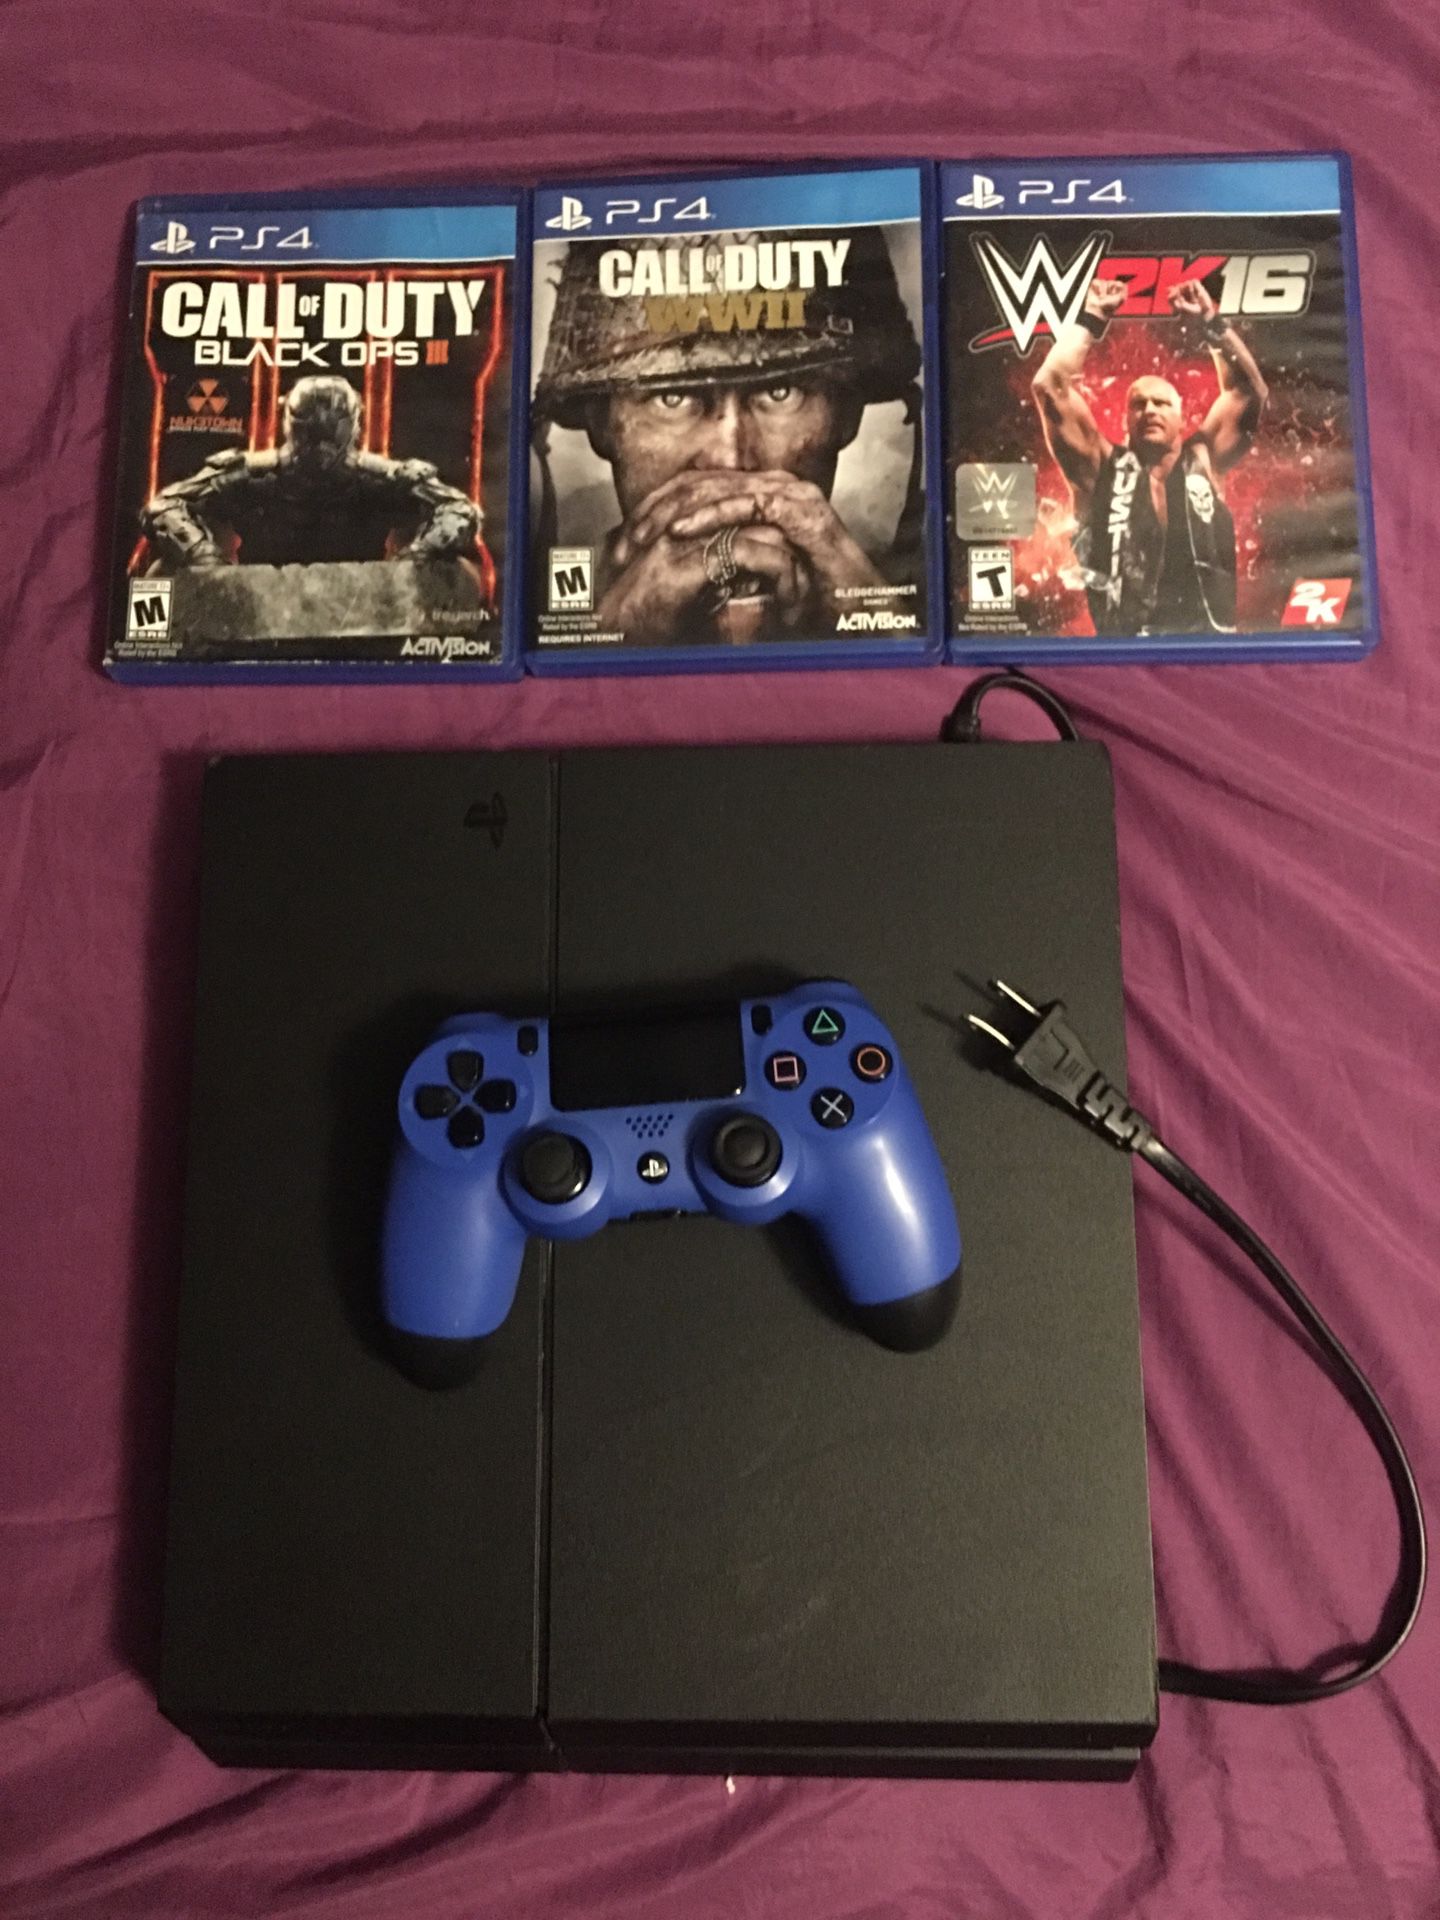 PS4 system and games